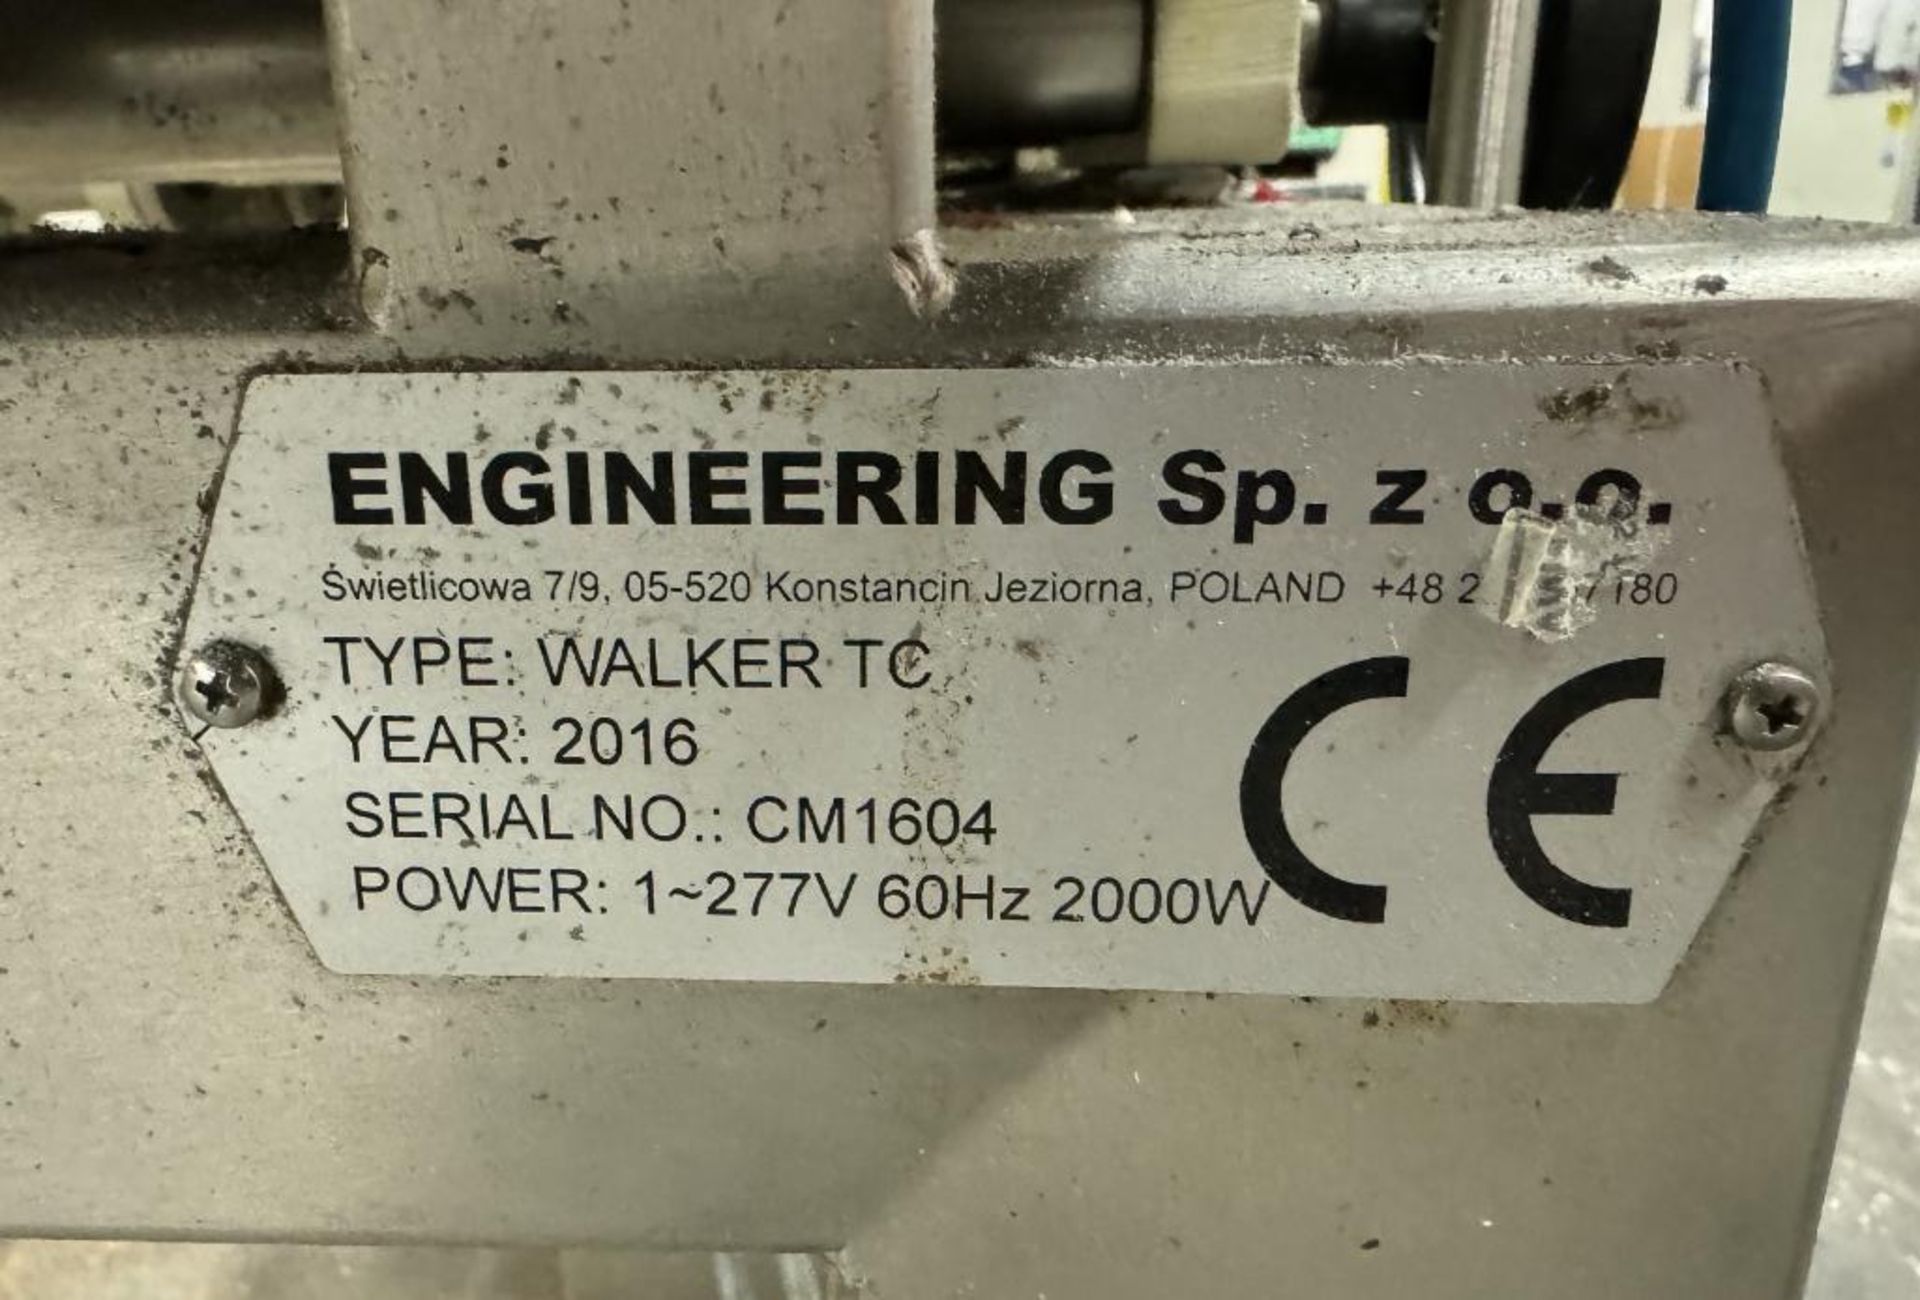 Engineering Sp. Label Applicator, Type Walker TC, Serial# CM1604, Built 2016. With control panel and - Image 11 of 11